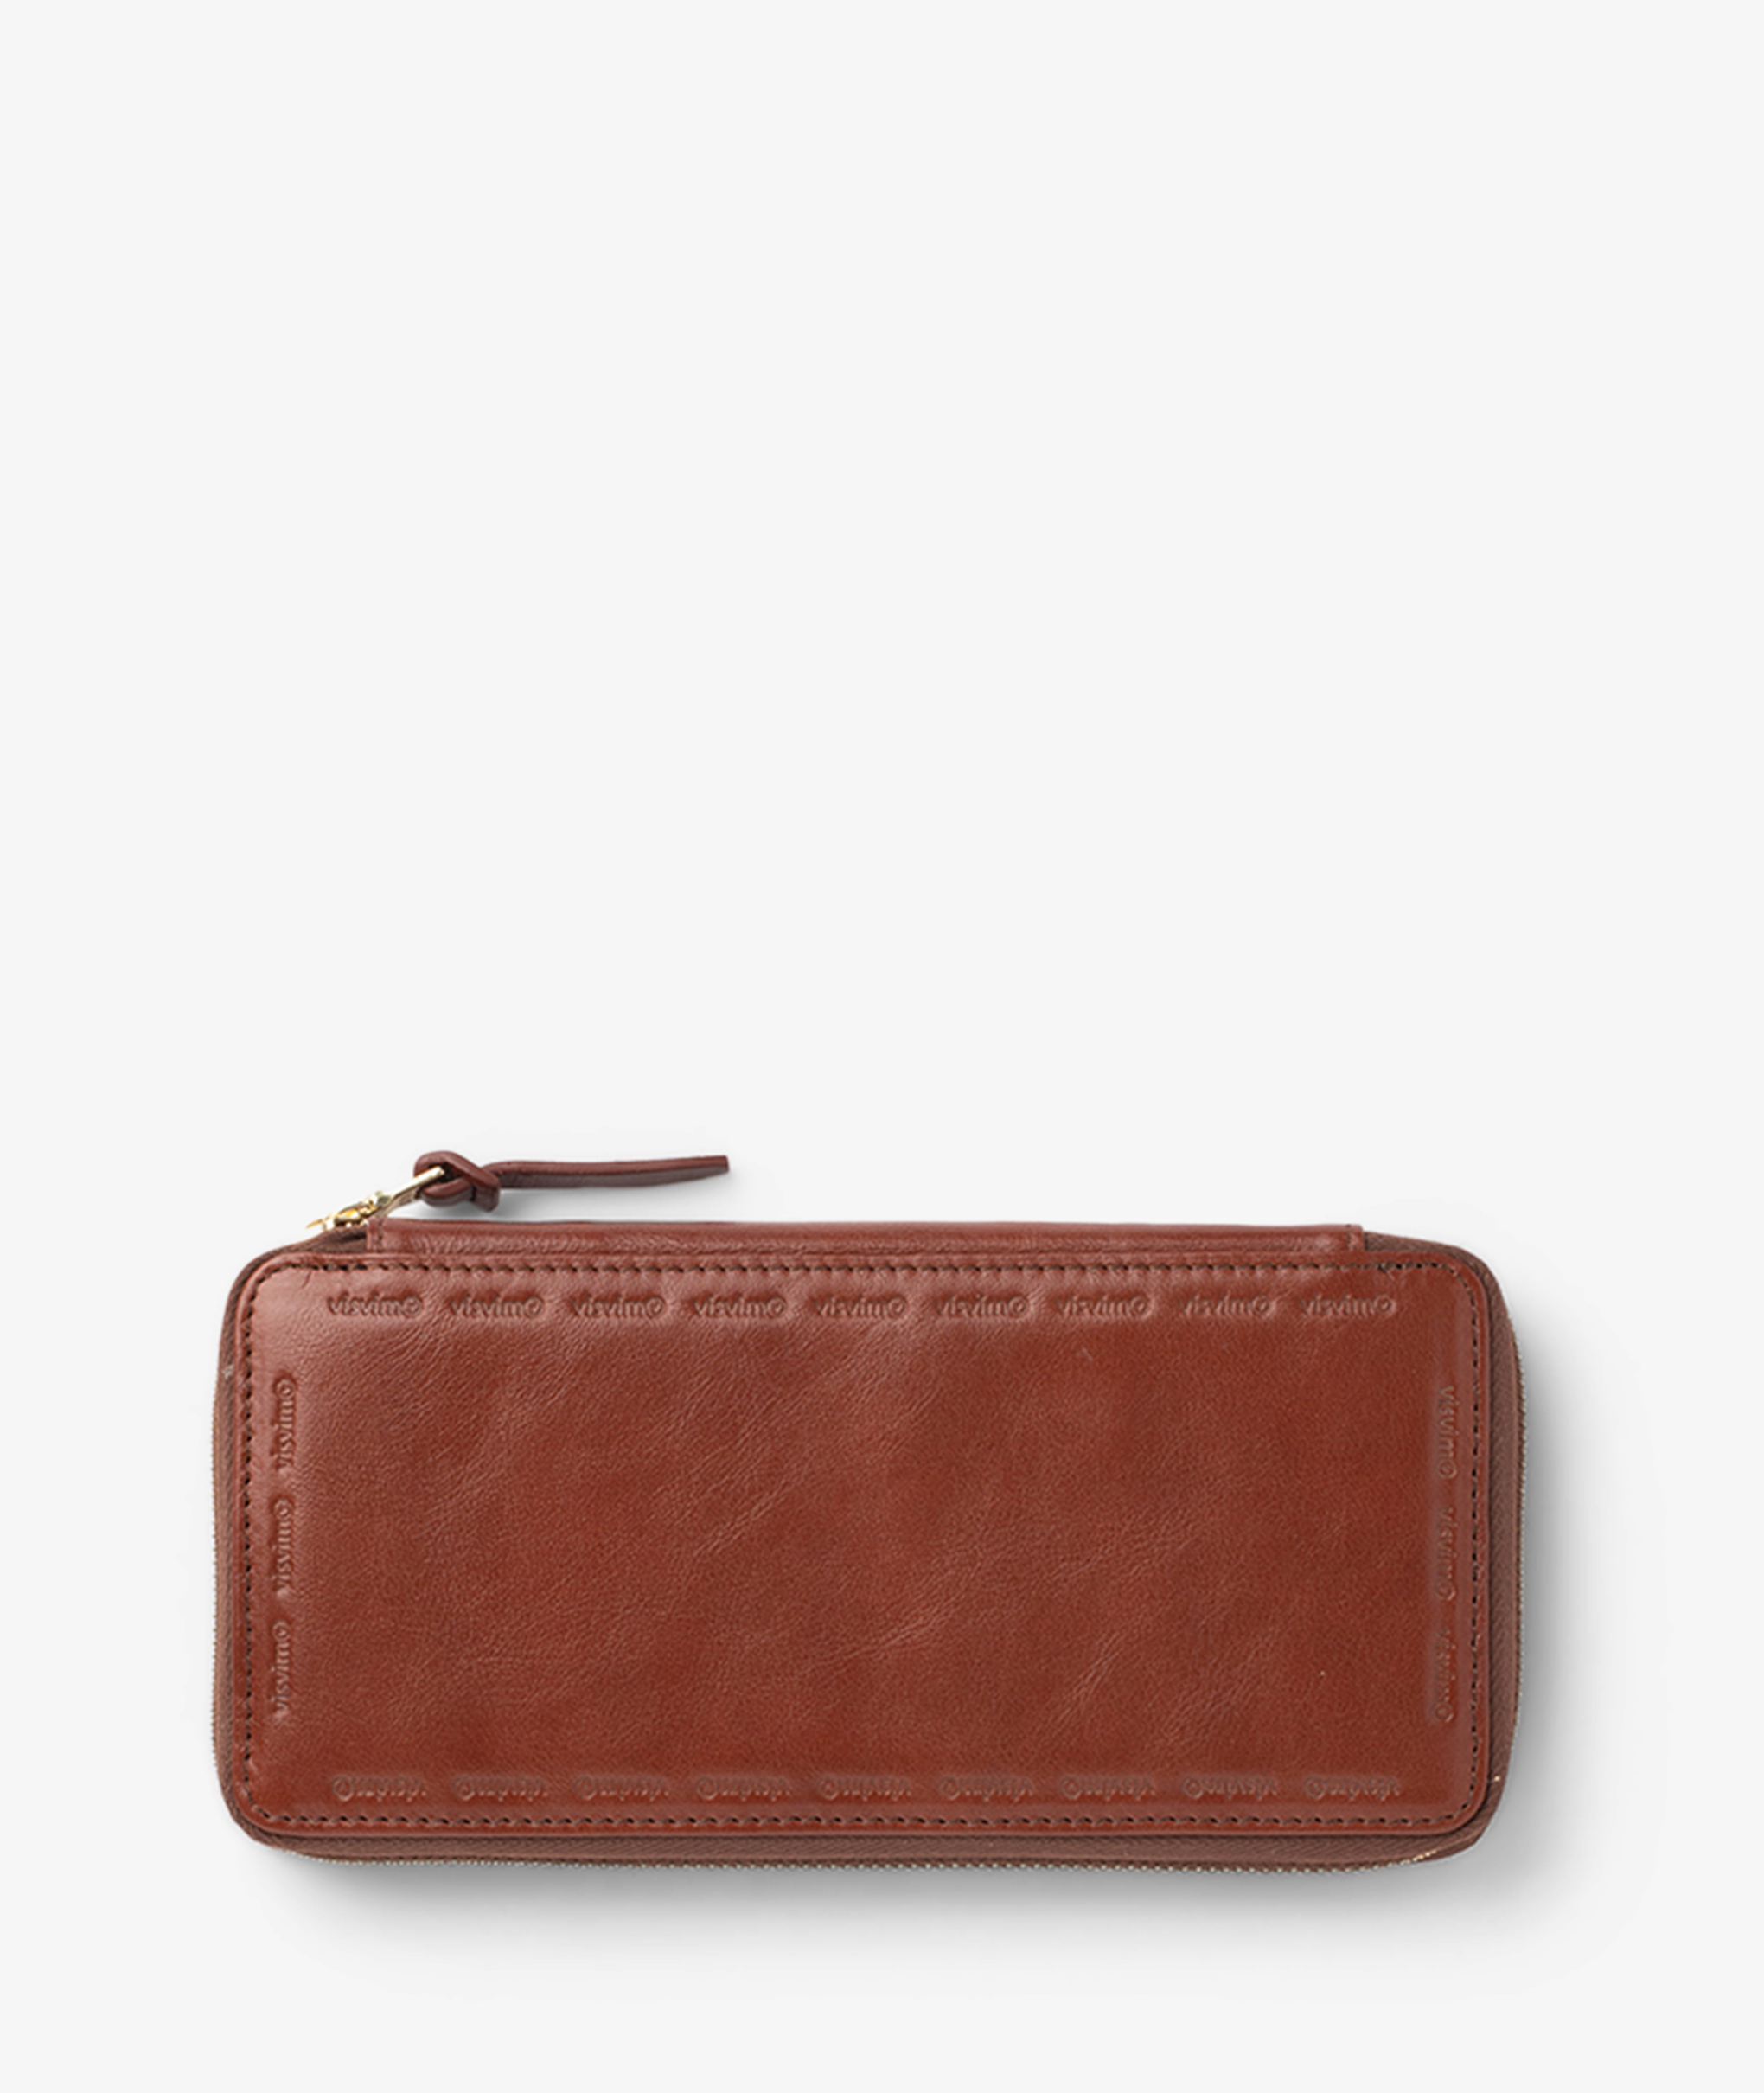 Norse Store | Shipping Worldwide - Visvim Leather Long Wallet - Brown